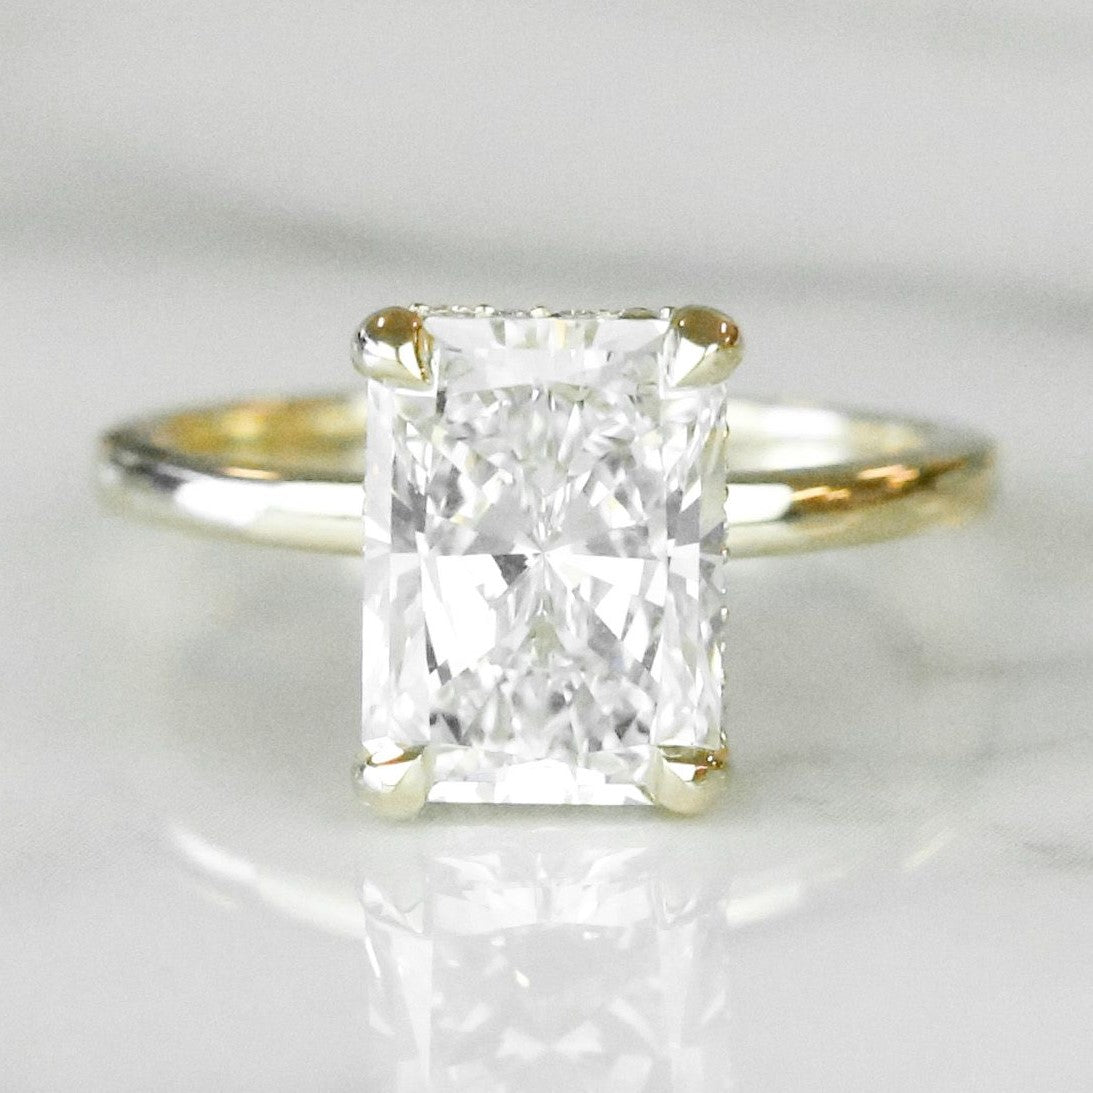 2021 Engagement Ring Trends | Philadelphia Jeweler Breaks Down the Top Engagement Rings Styles For the Year